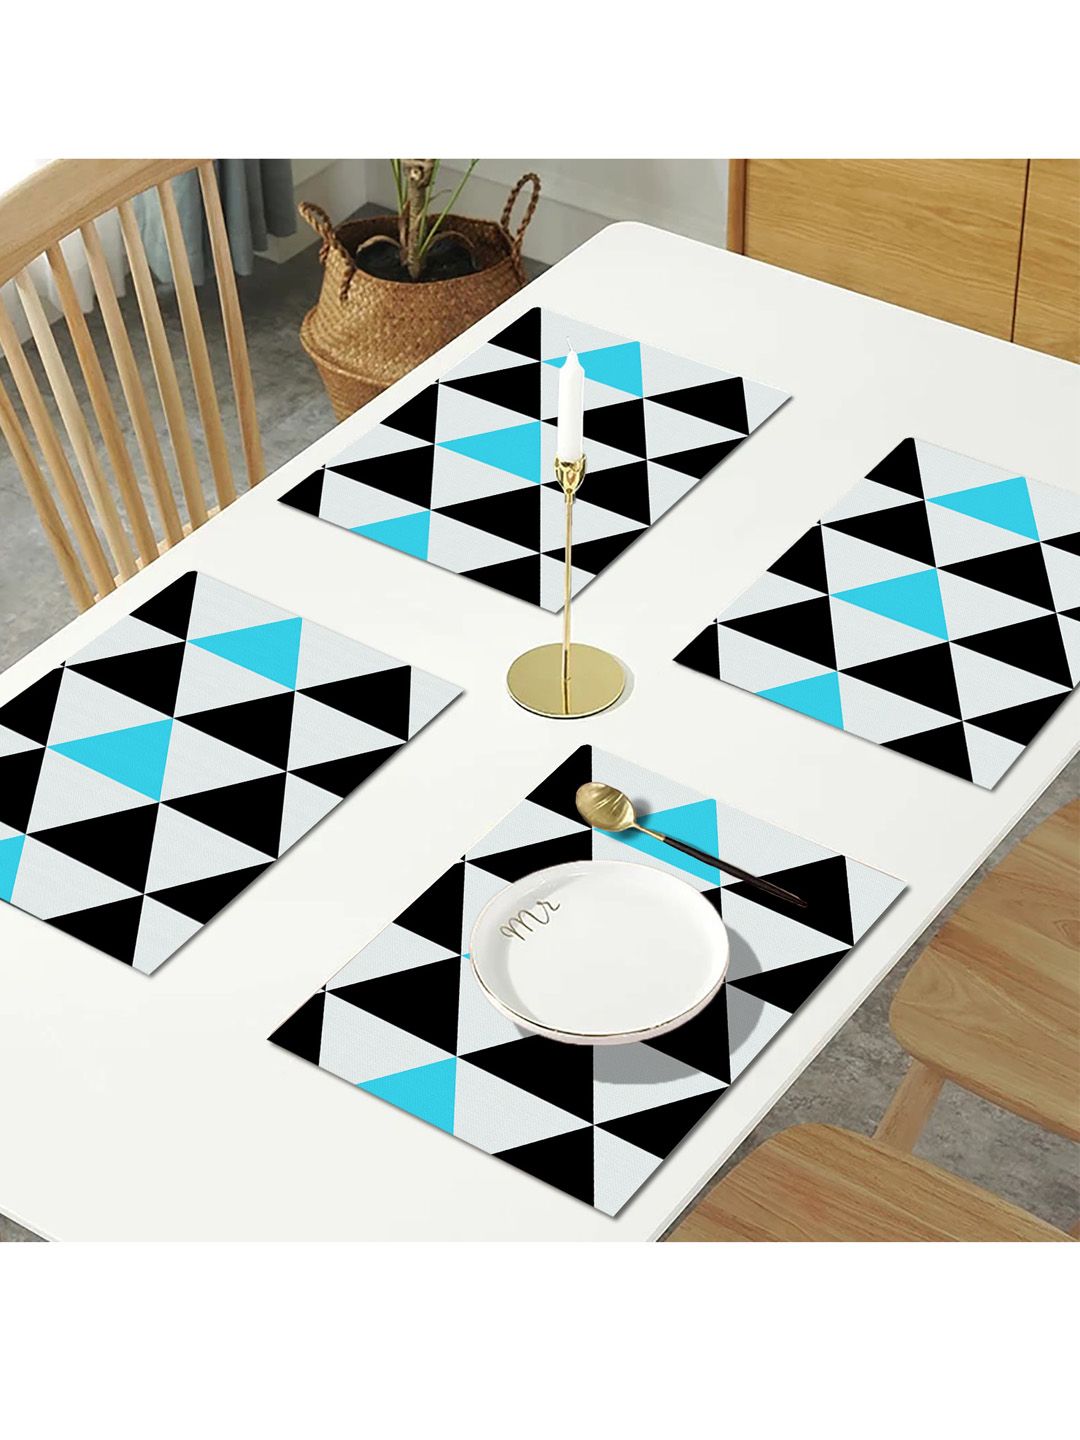 AEROHAVEN Set Of 4 Black & Blue Geometric Printed Table Placemats Price in India